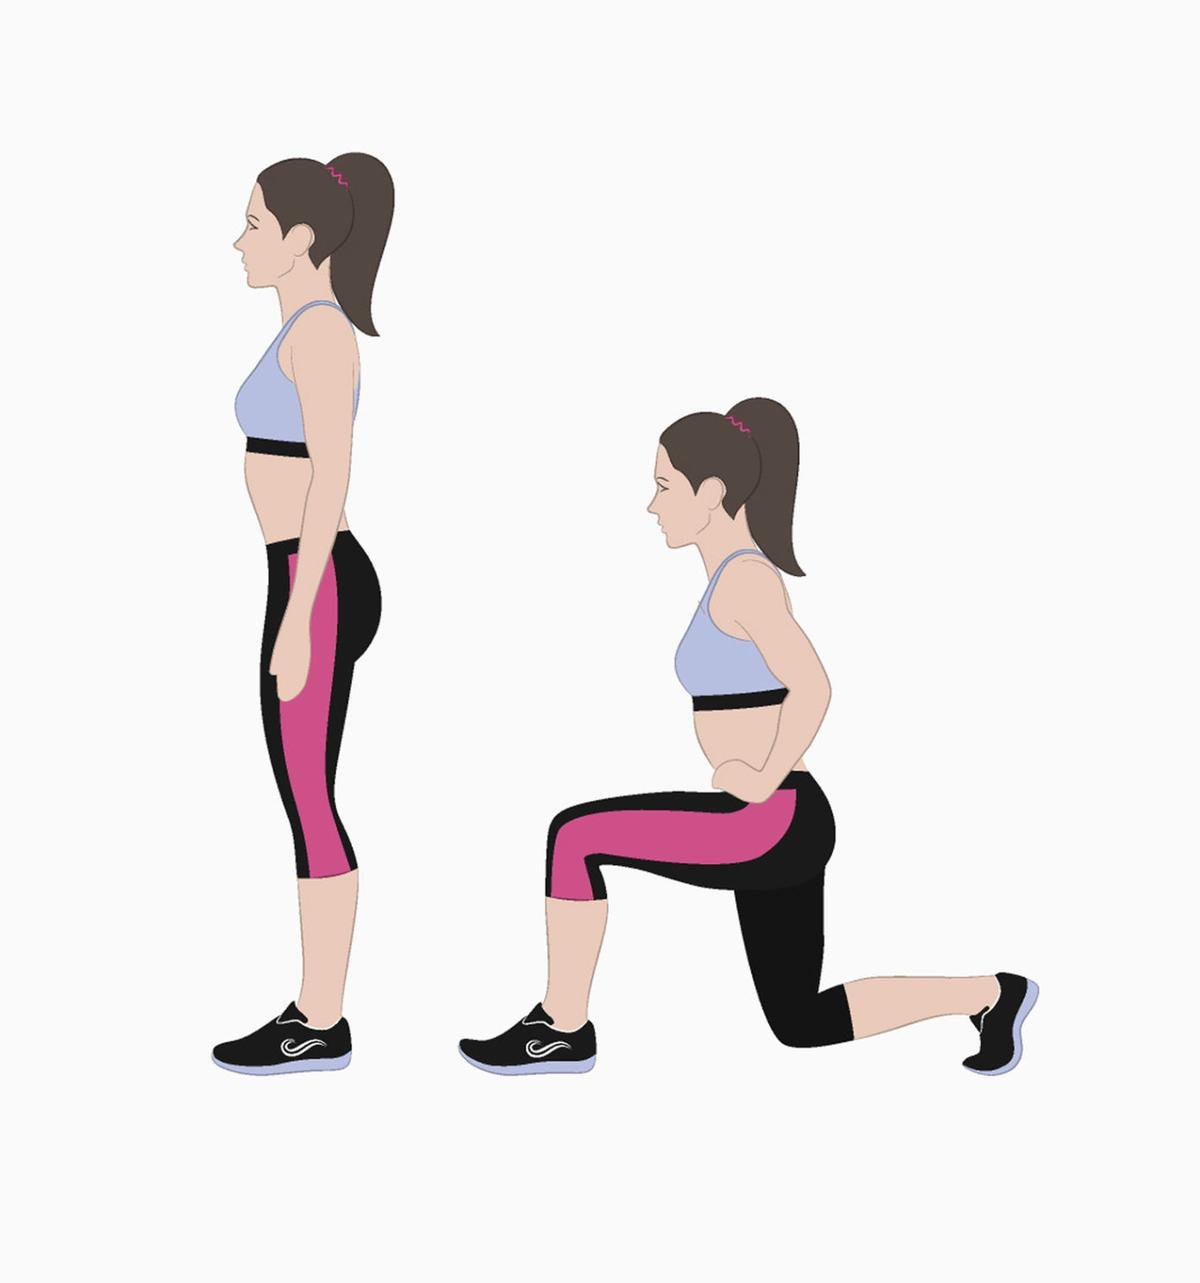 Ready to exercise at home? Our Week 3 workout focuses on the lower body ...